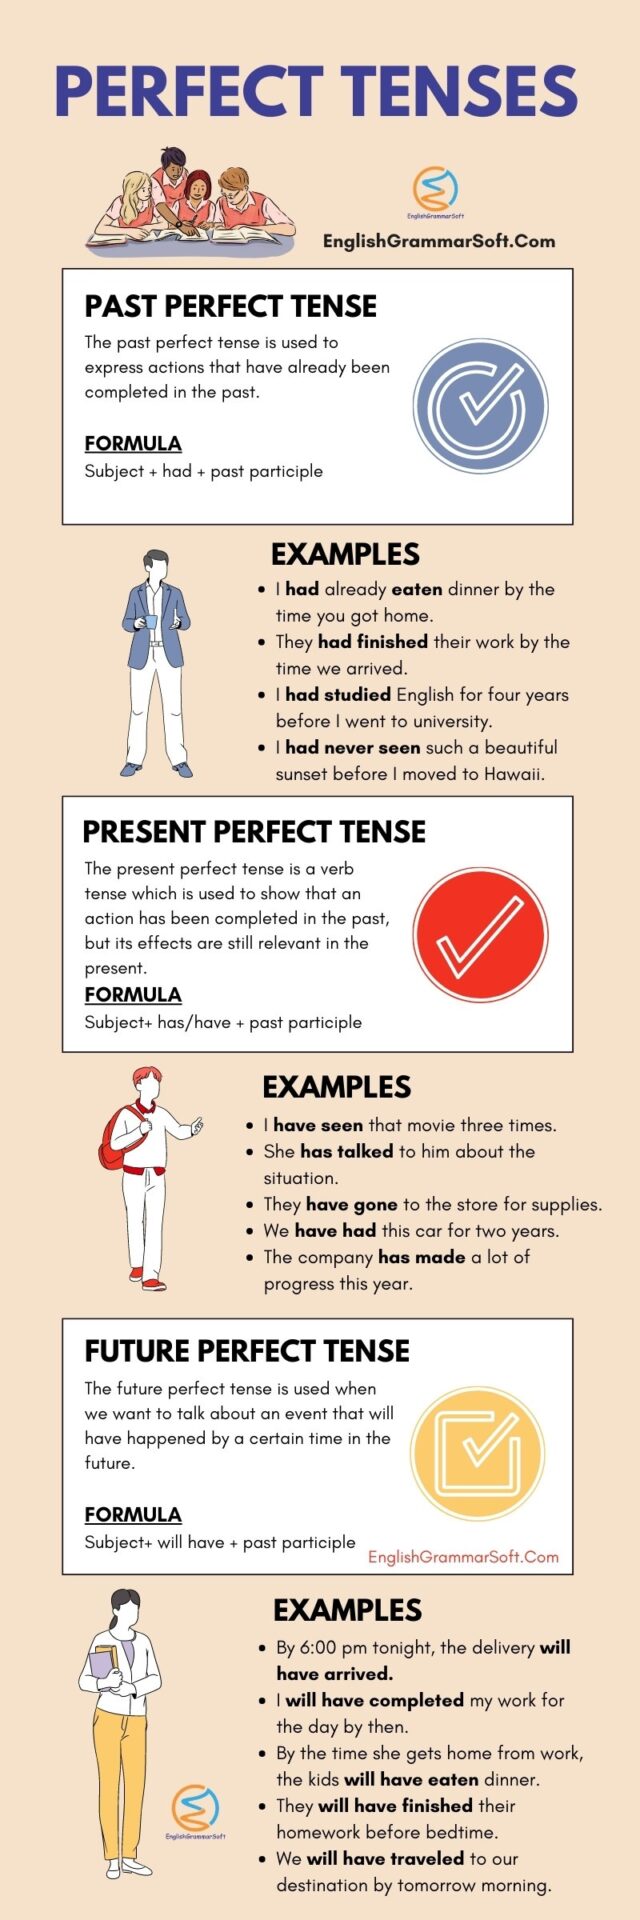 Perfect Tenses of Verbs